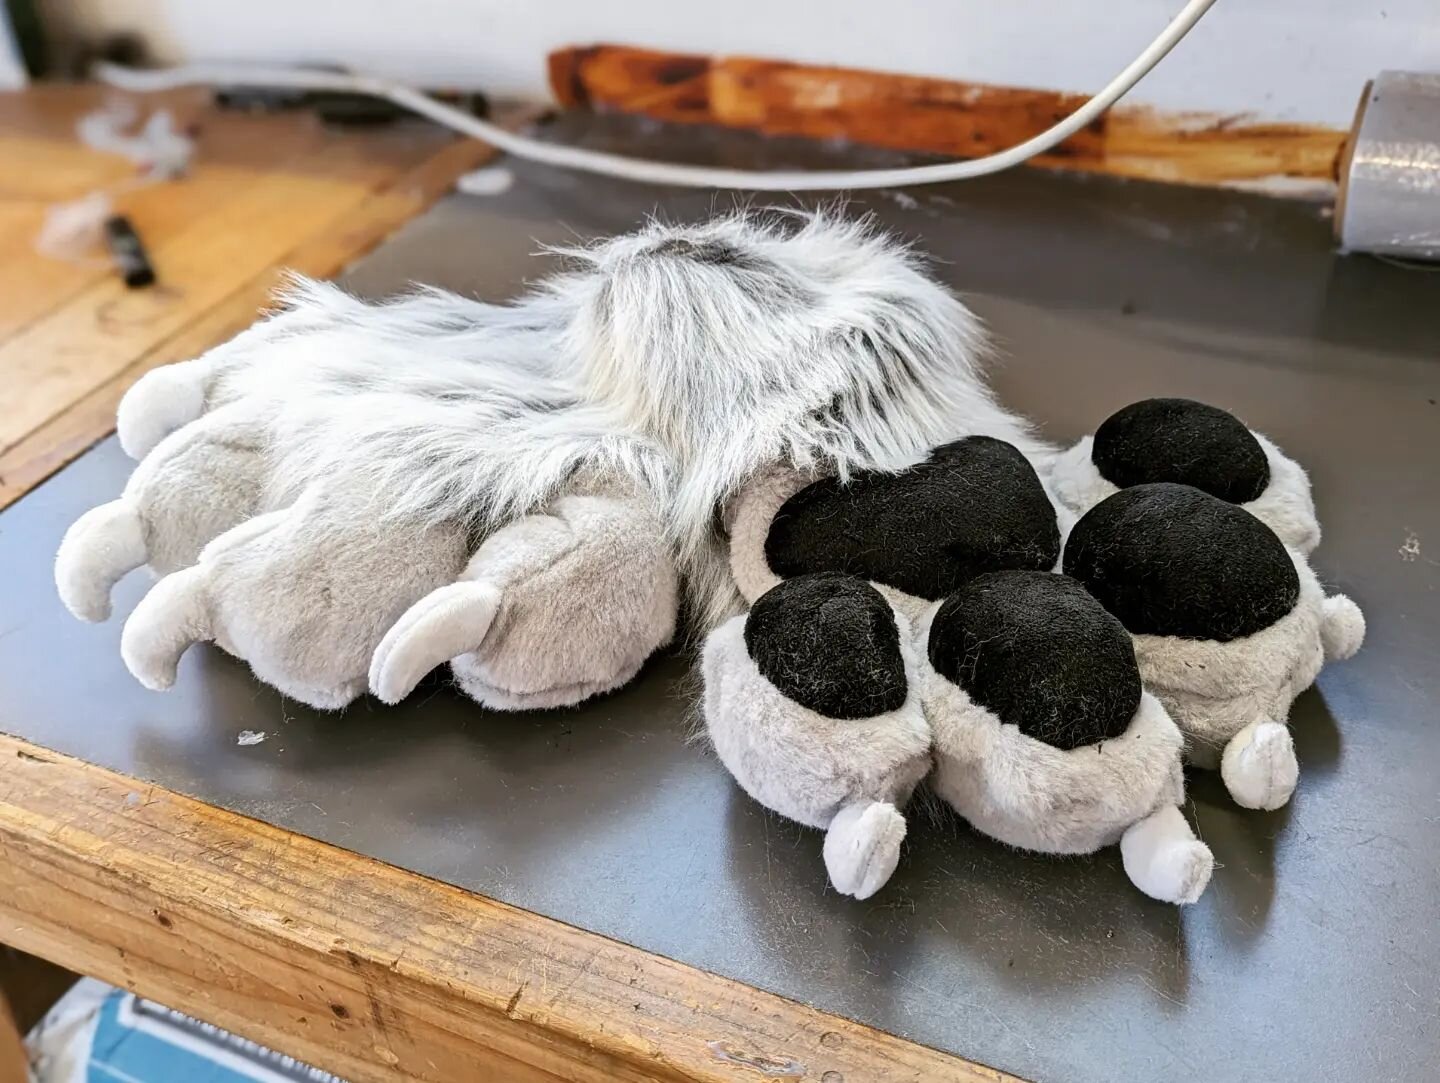 Getting to work on another full digitigrade fursuit, starting with the hand paws! 🐾

I can already tell that this fur is going to be really fun to work with 😁 stay tuned for updates!

#furryfandom #furry #fursuitmaker #fursuitmaking #furryphoto #fu